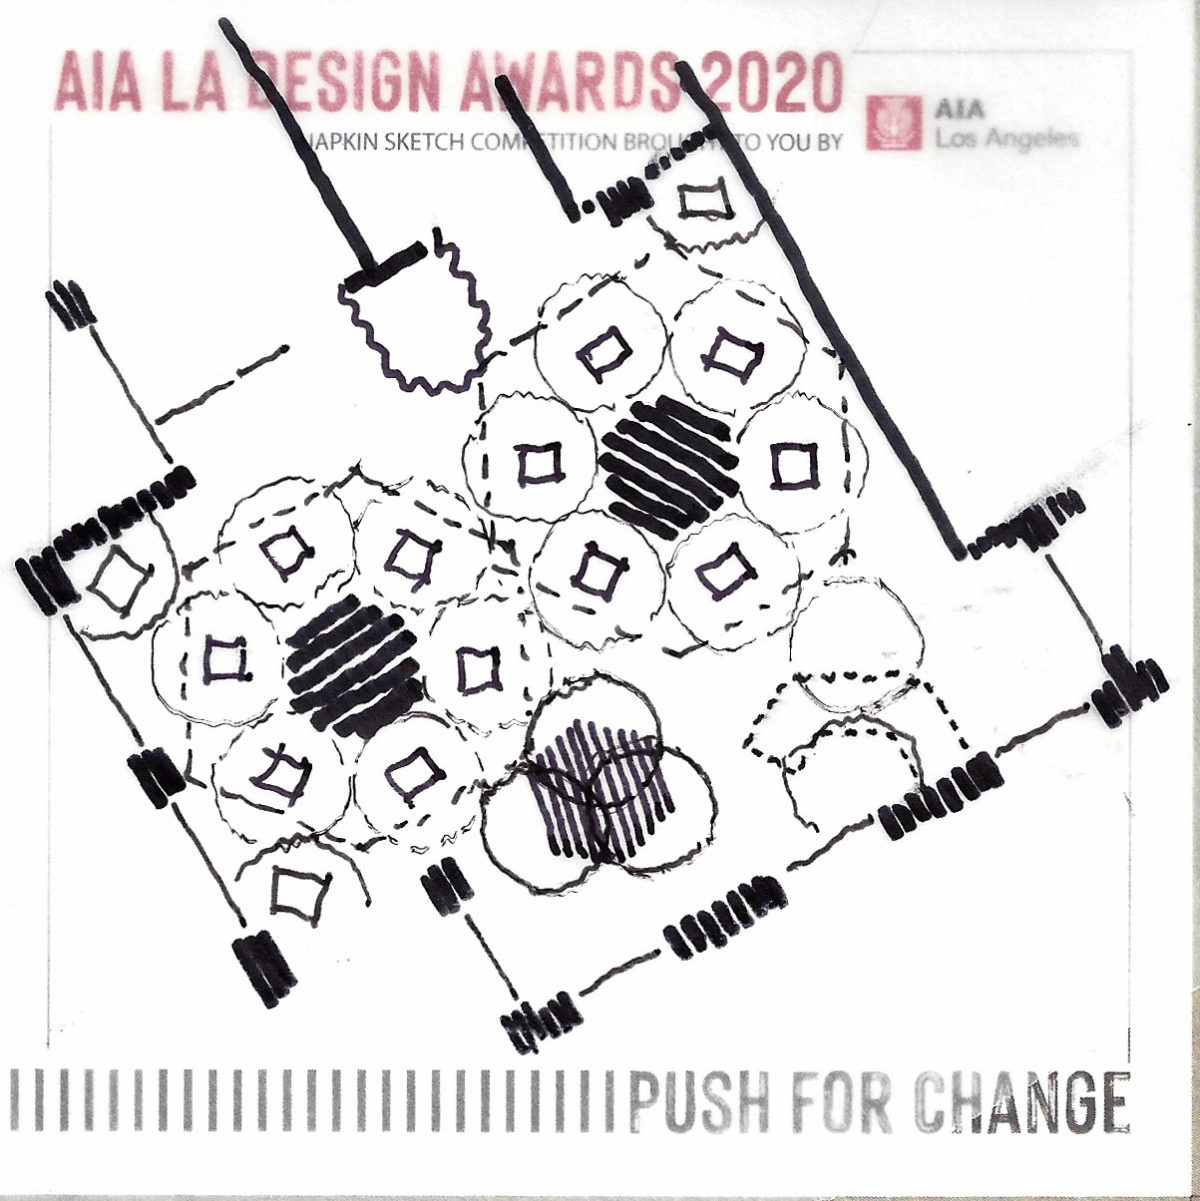 What a nice surprise to win the the AIA/LA Design Awards Napkin Sketch Competition with “a plan for a socially distanced salon”